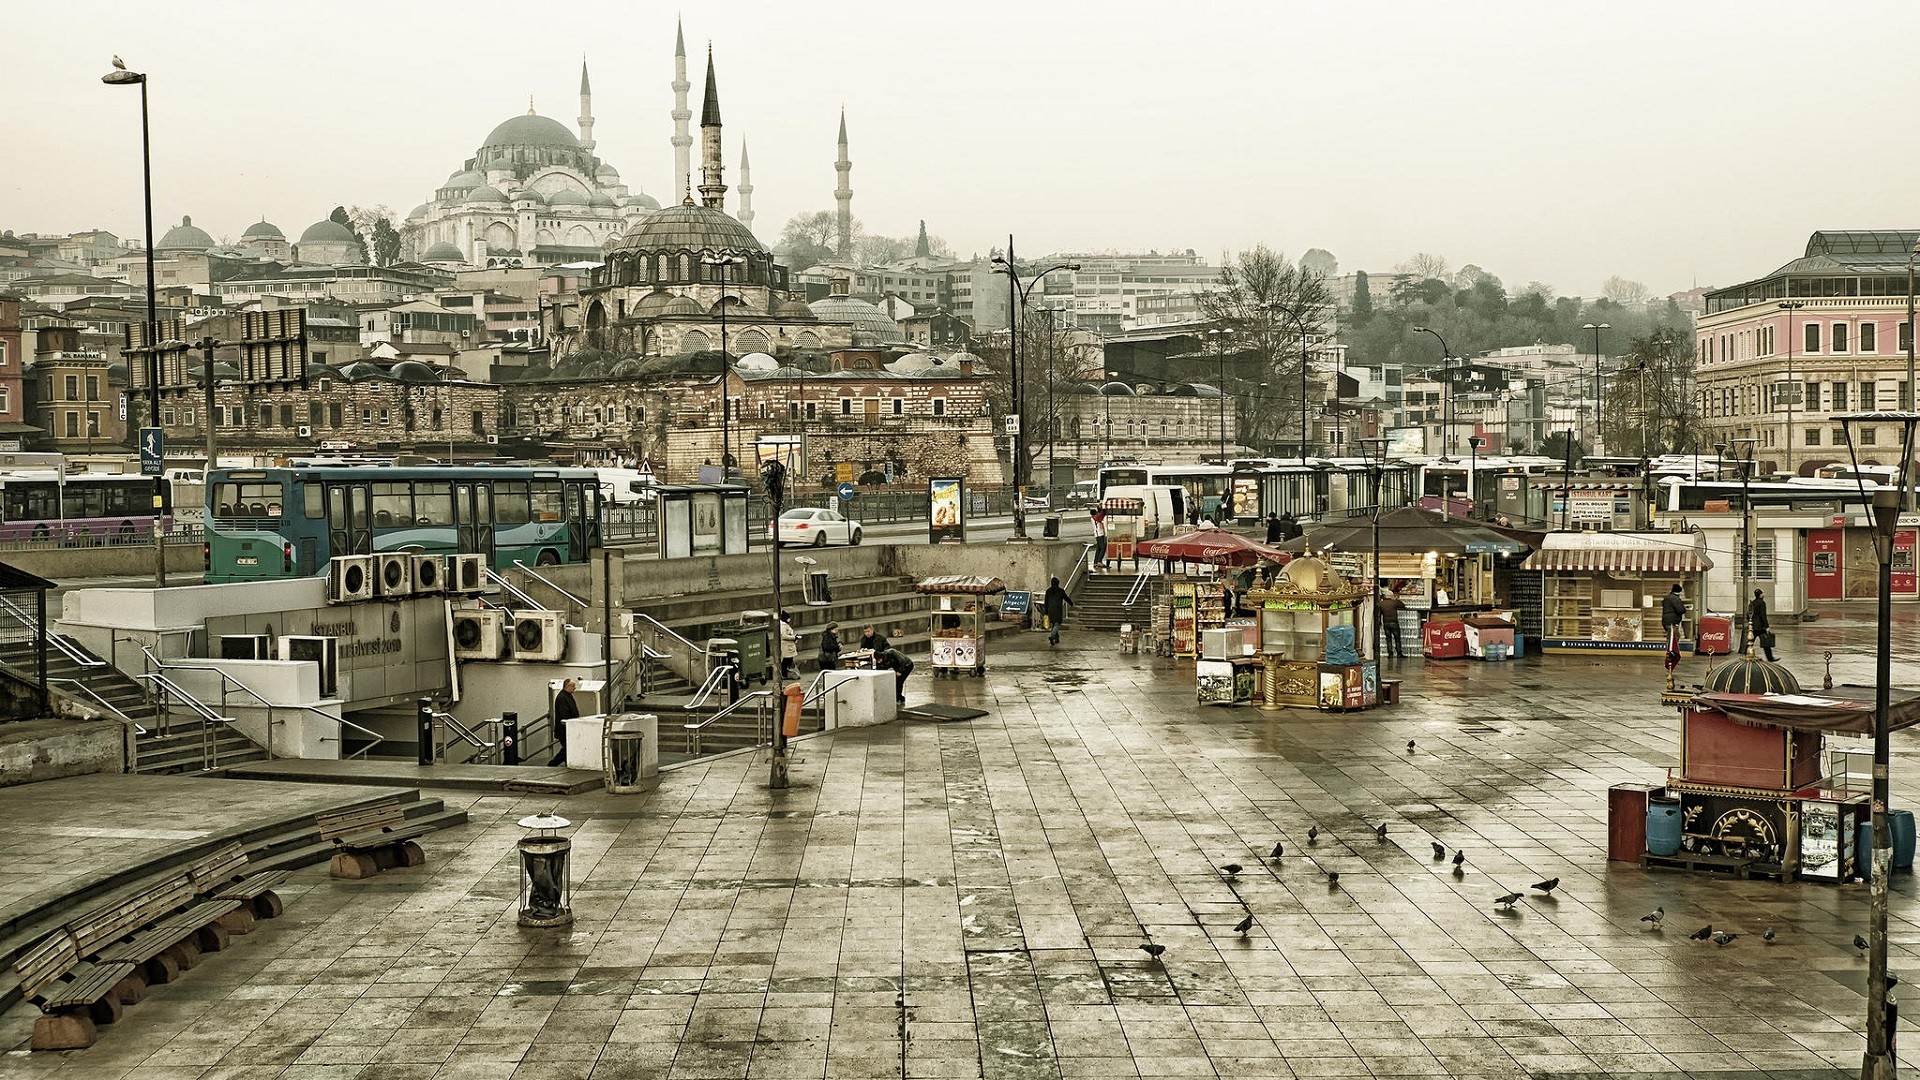 Istanbul Turkey Mosque Architecture Islamic Architecture Building Buses Town Square Car Pigeons Benc 1920x1080